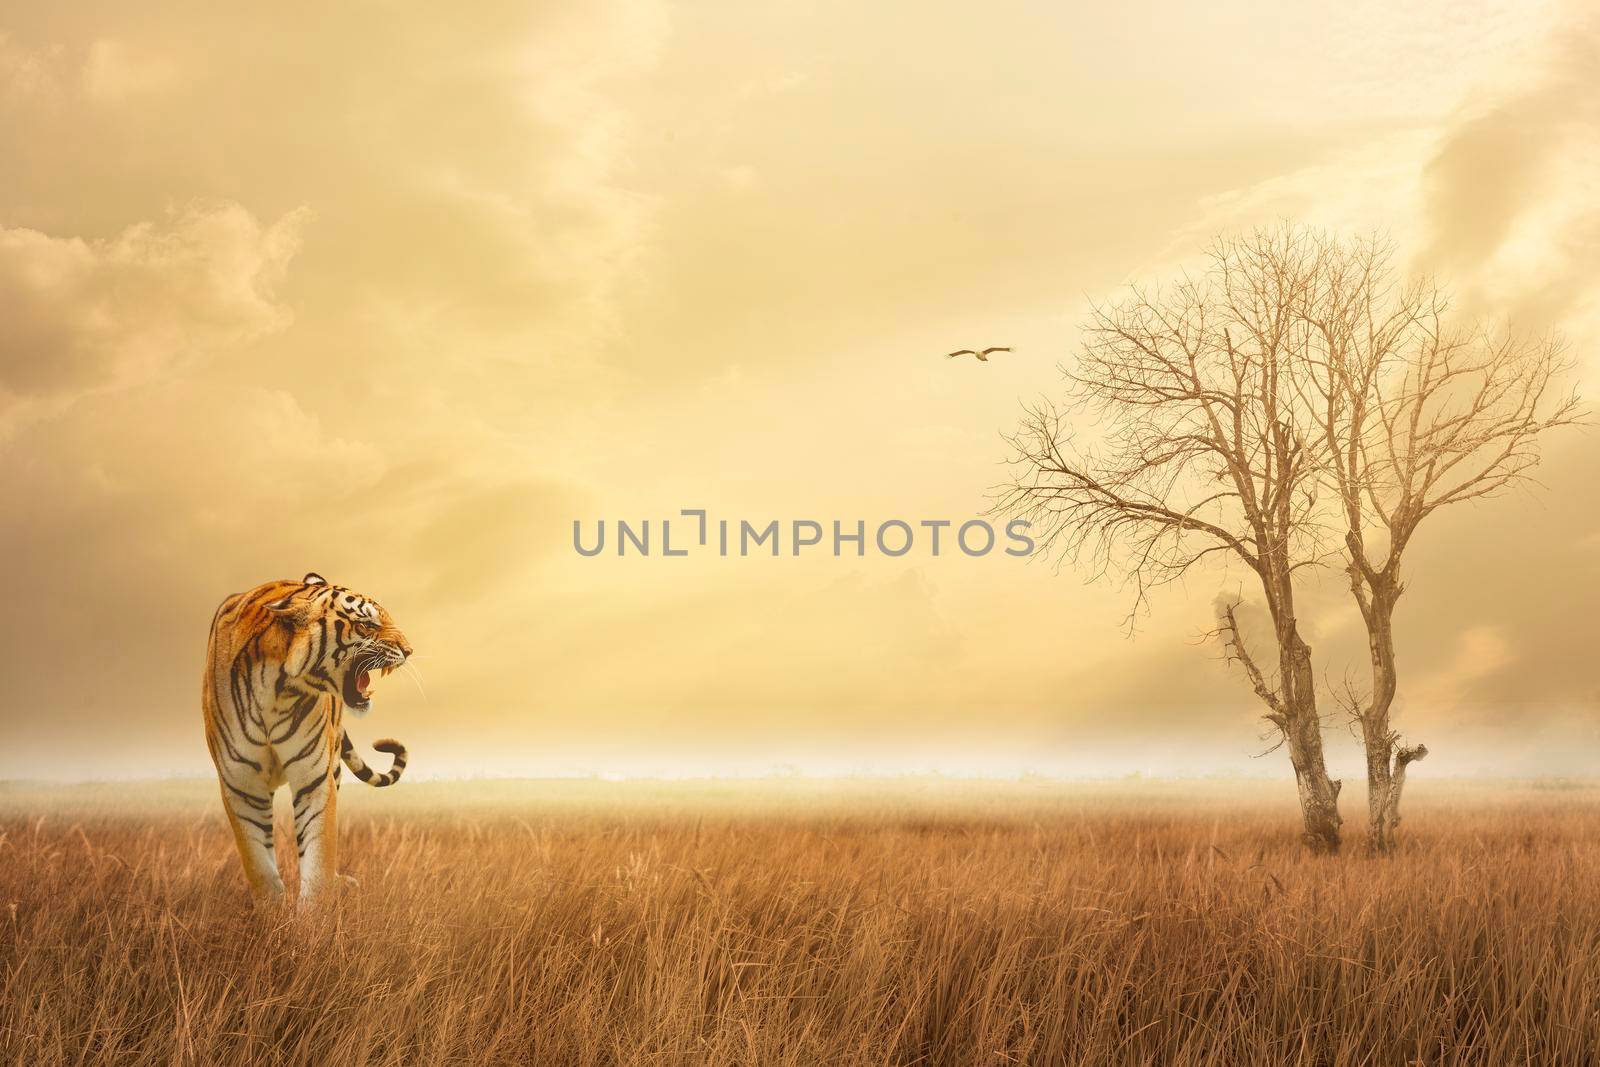 Great tiger male and an eagle in the nature habitat. Tiger walk during the golden light time. Wildlife scene with danger animal.